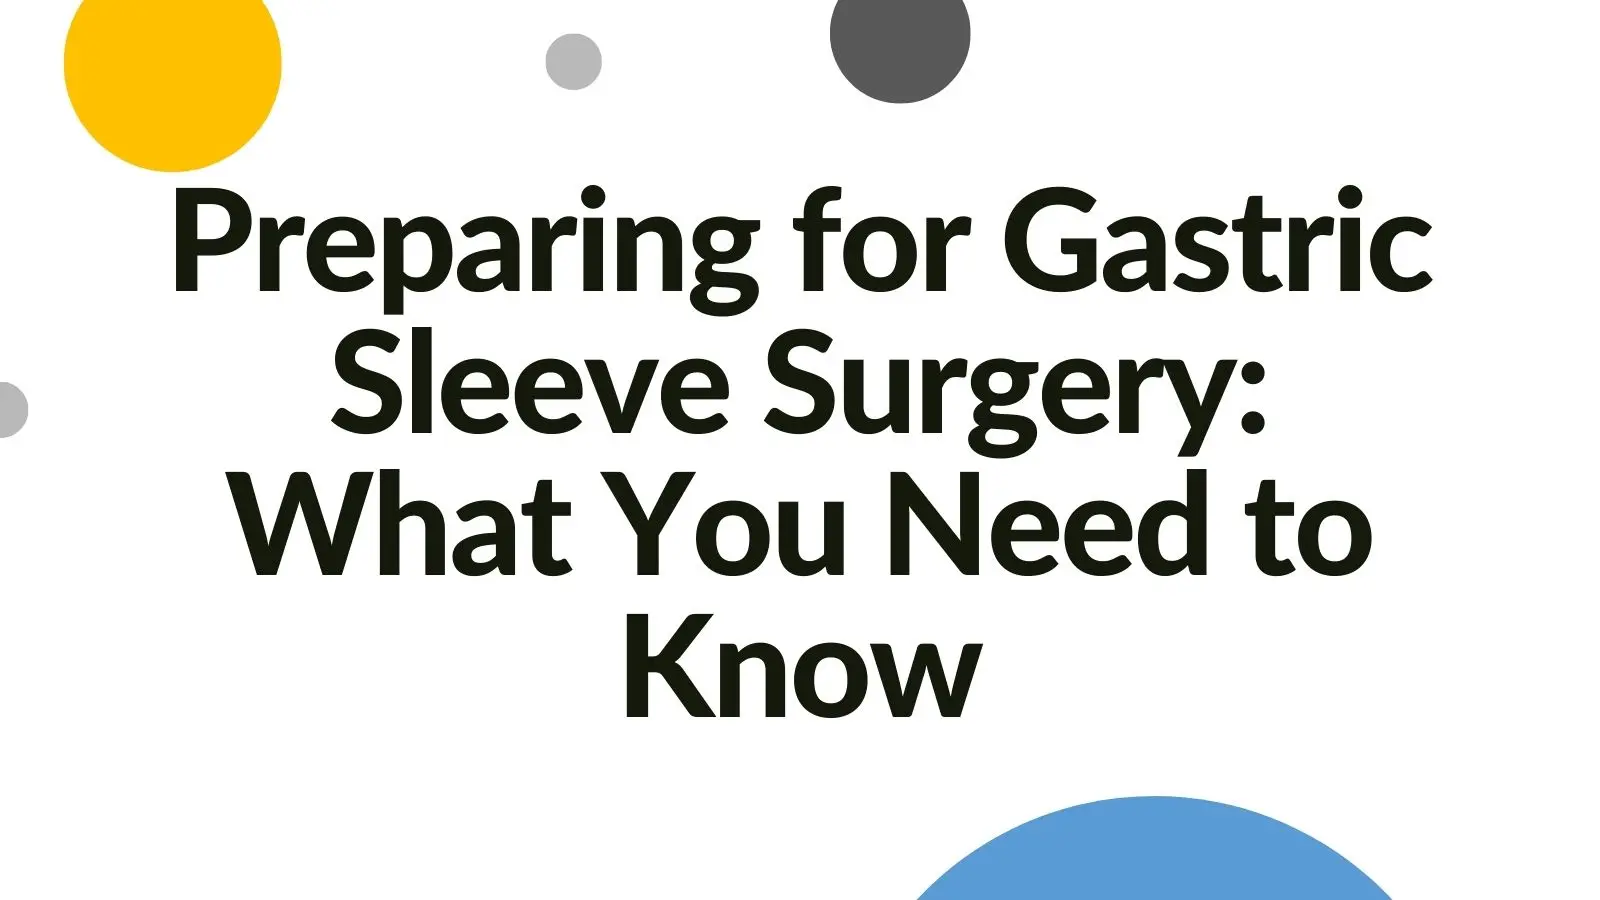 Preparing for Gastric Sleeve Surgery